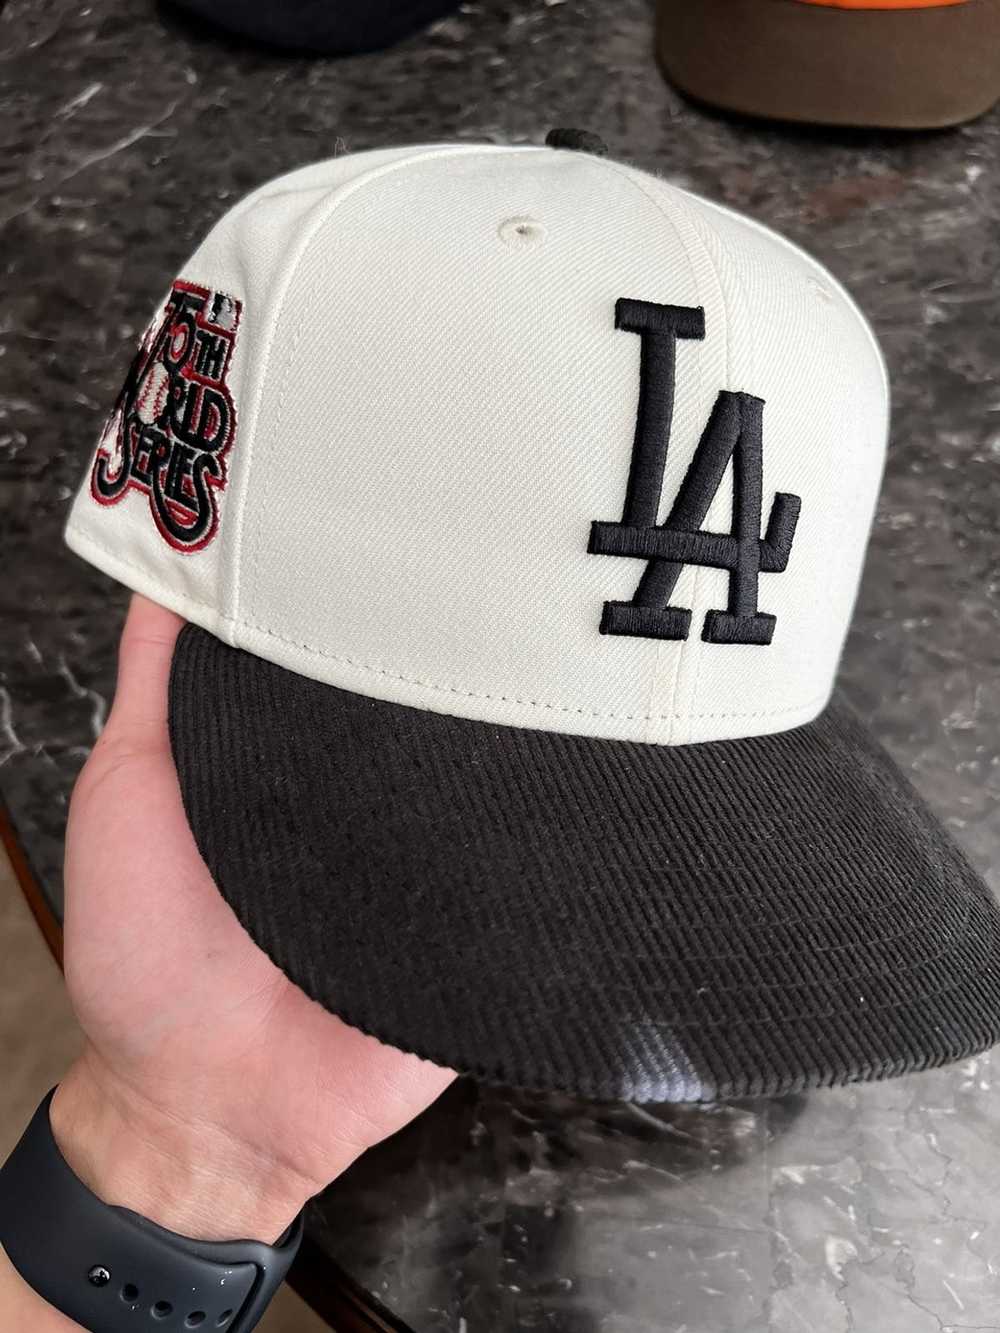 Lost Again [LA Dodgers] FREE SHIPPING! – Cooltees Custom Apparel